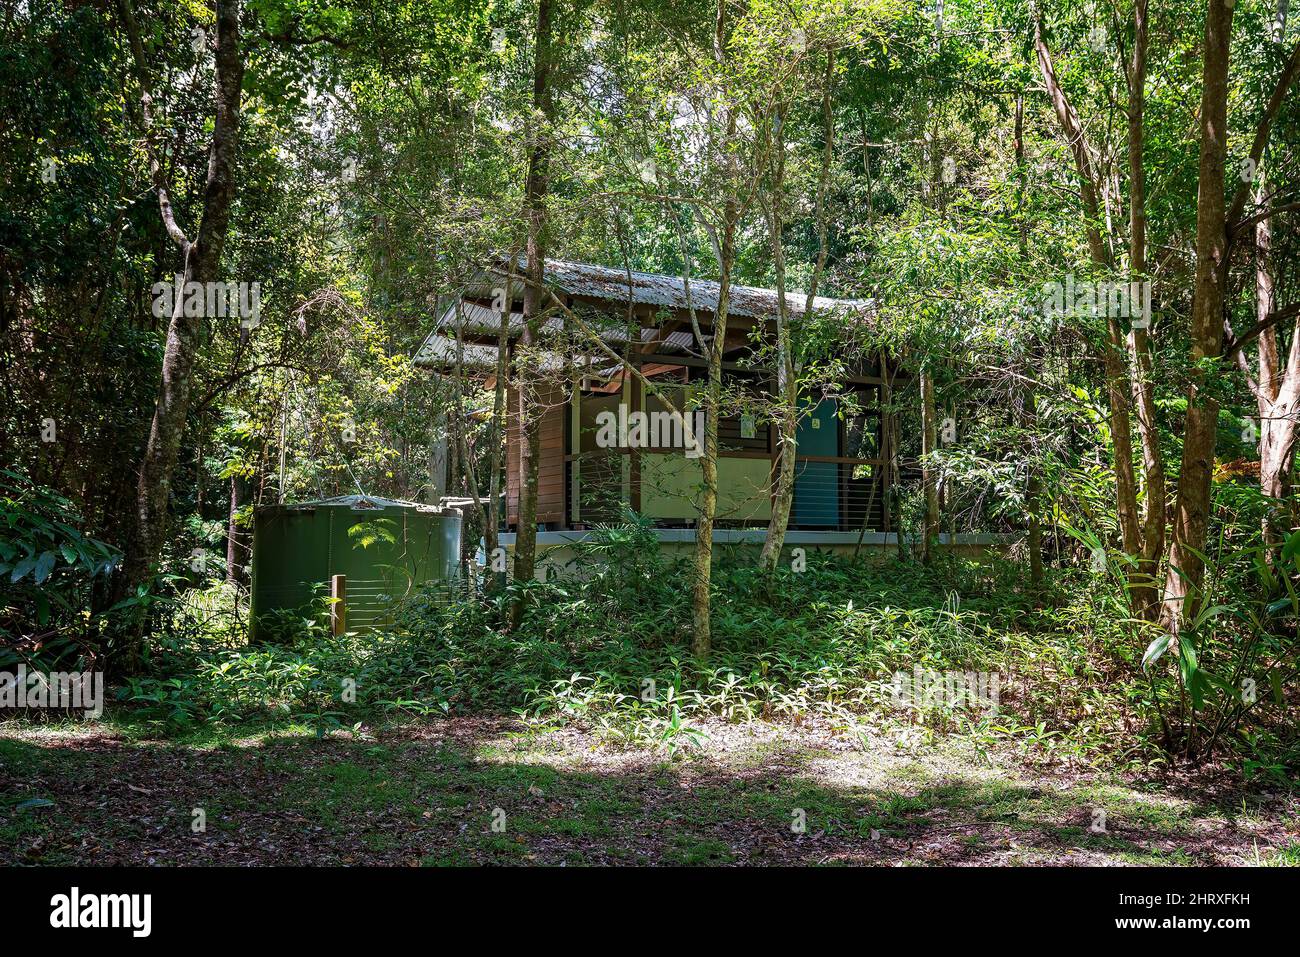 Public toilets in a national park surrounded by tropical rainforest. Stock Photo